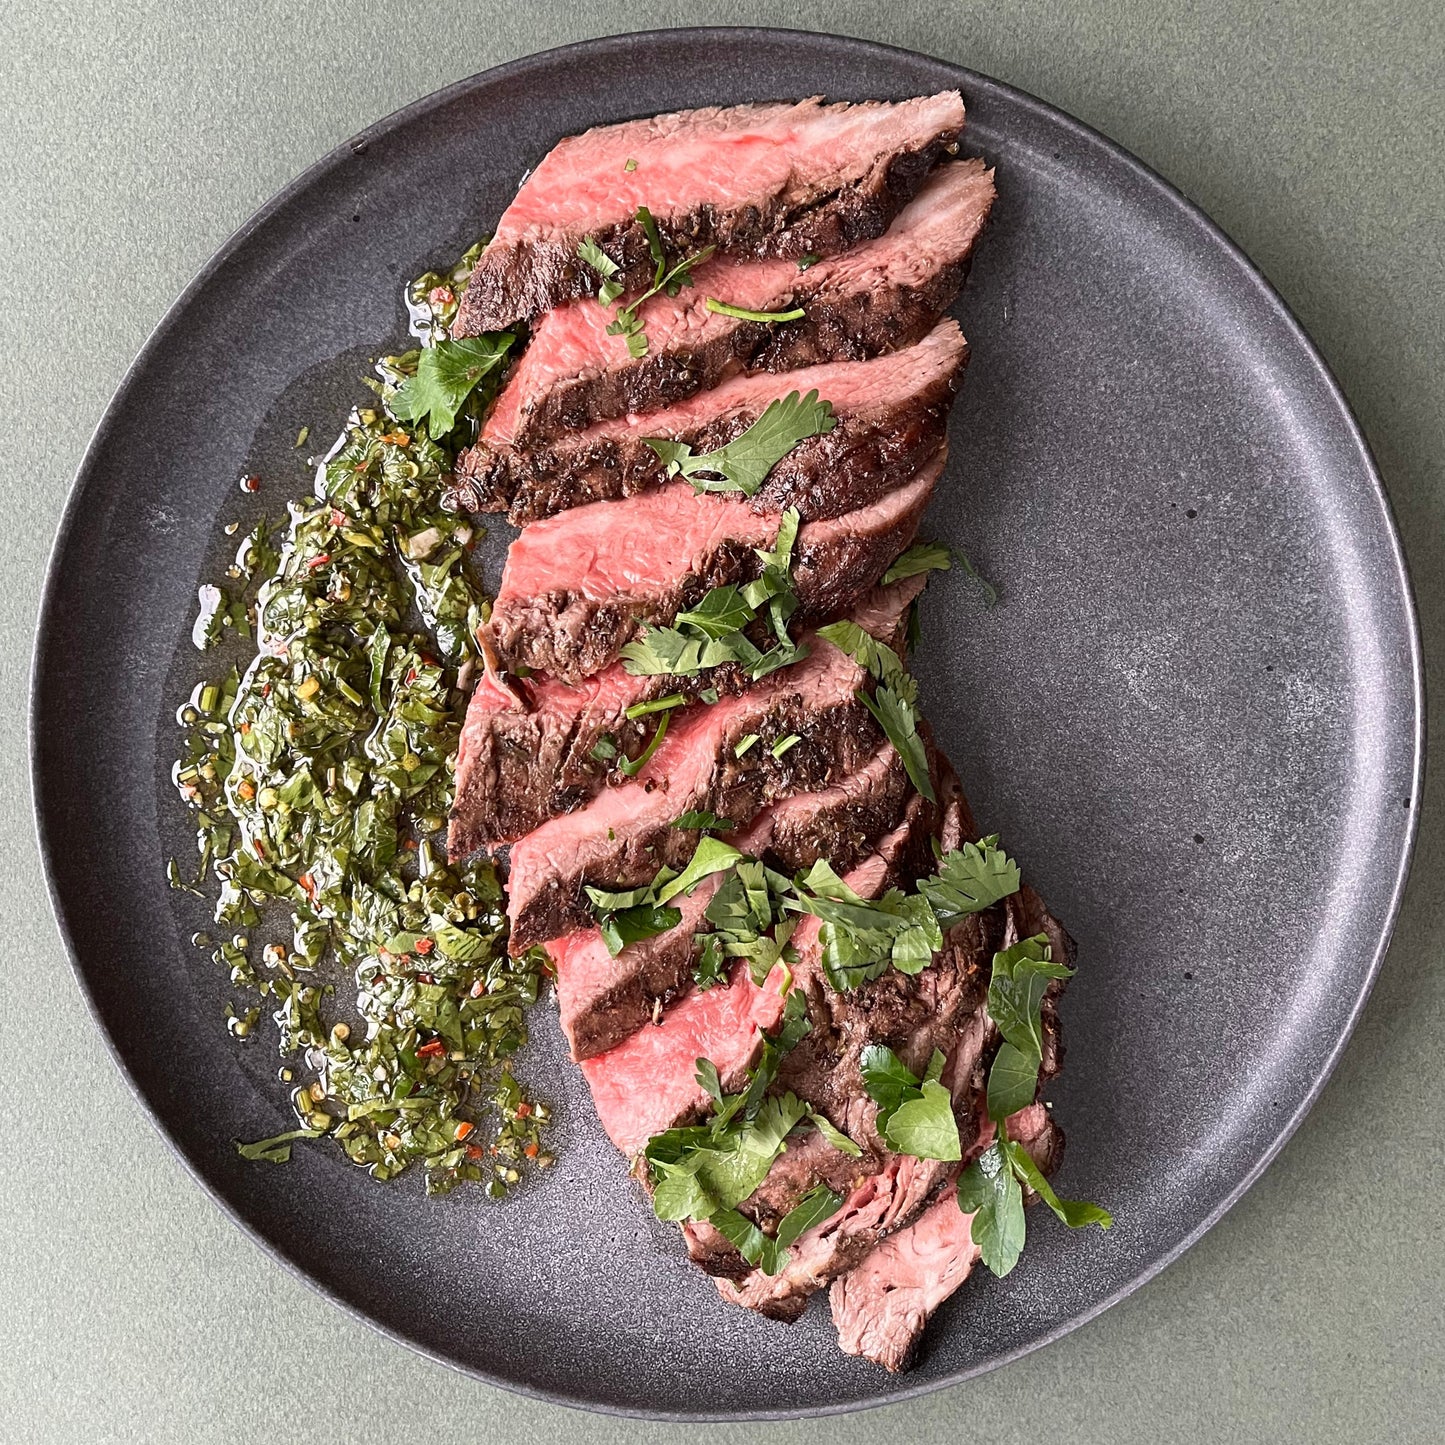 Grilled Balsamic-Marinated Flank Steak with Chimichurri Sauce